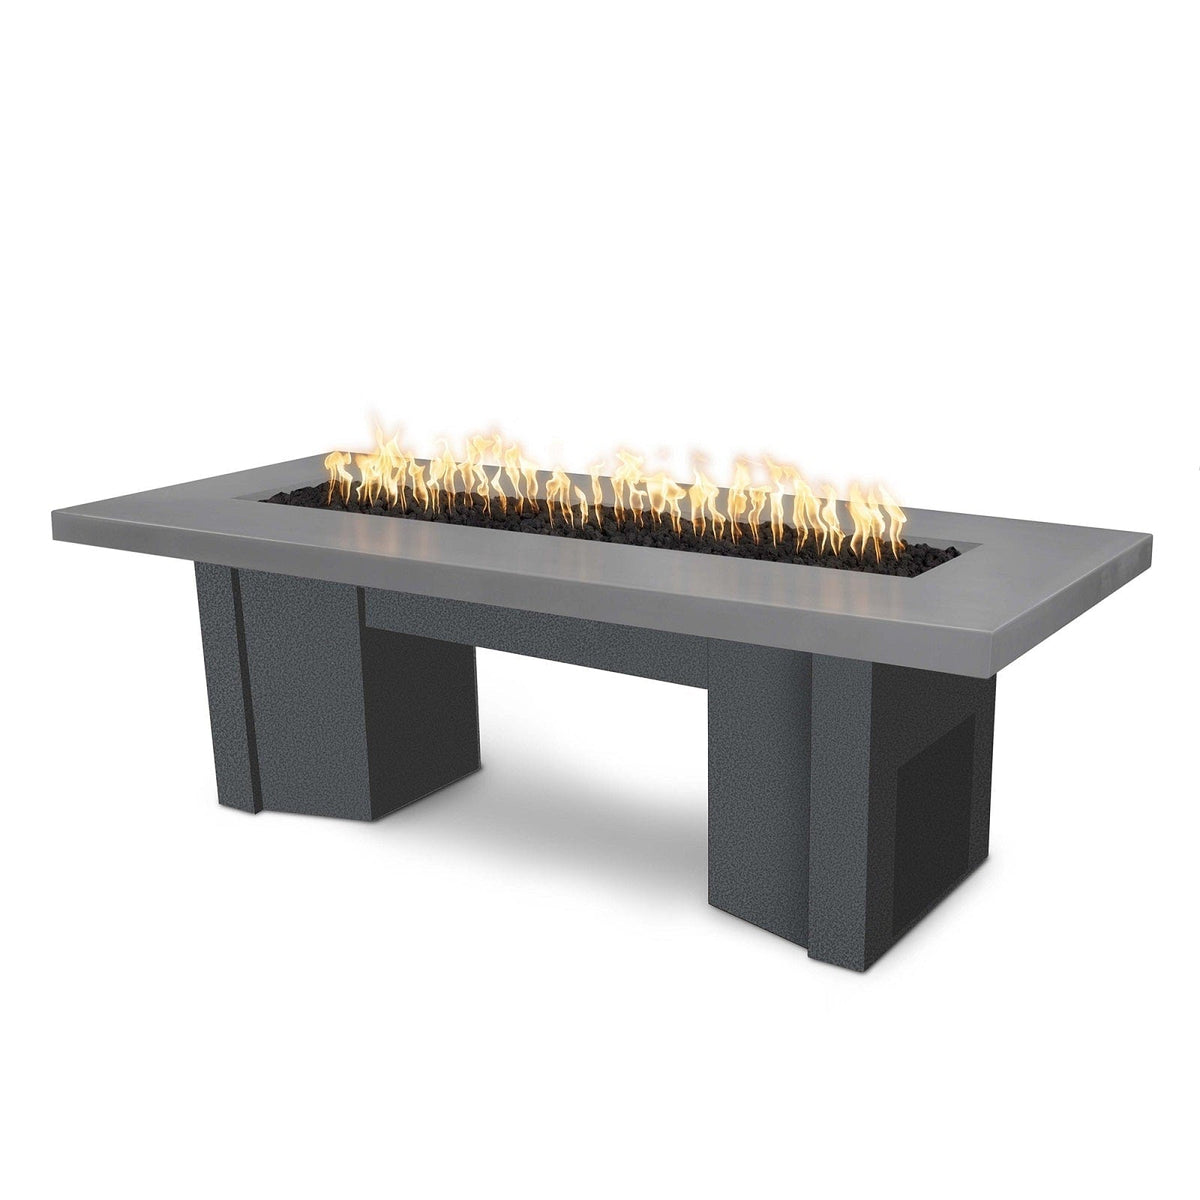 The Outdoor Plus Fire Features Natural Gray (-NGY) / Silver Vein Powder Coated Steel (-SLV) The Outdoor Plus 60&quot; Alameda Fire Table Smooth Concrete in Natural Gas - 12V Electronic Ignition / OPT-ALMGFRC60E12V-NG